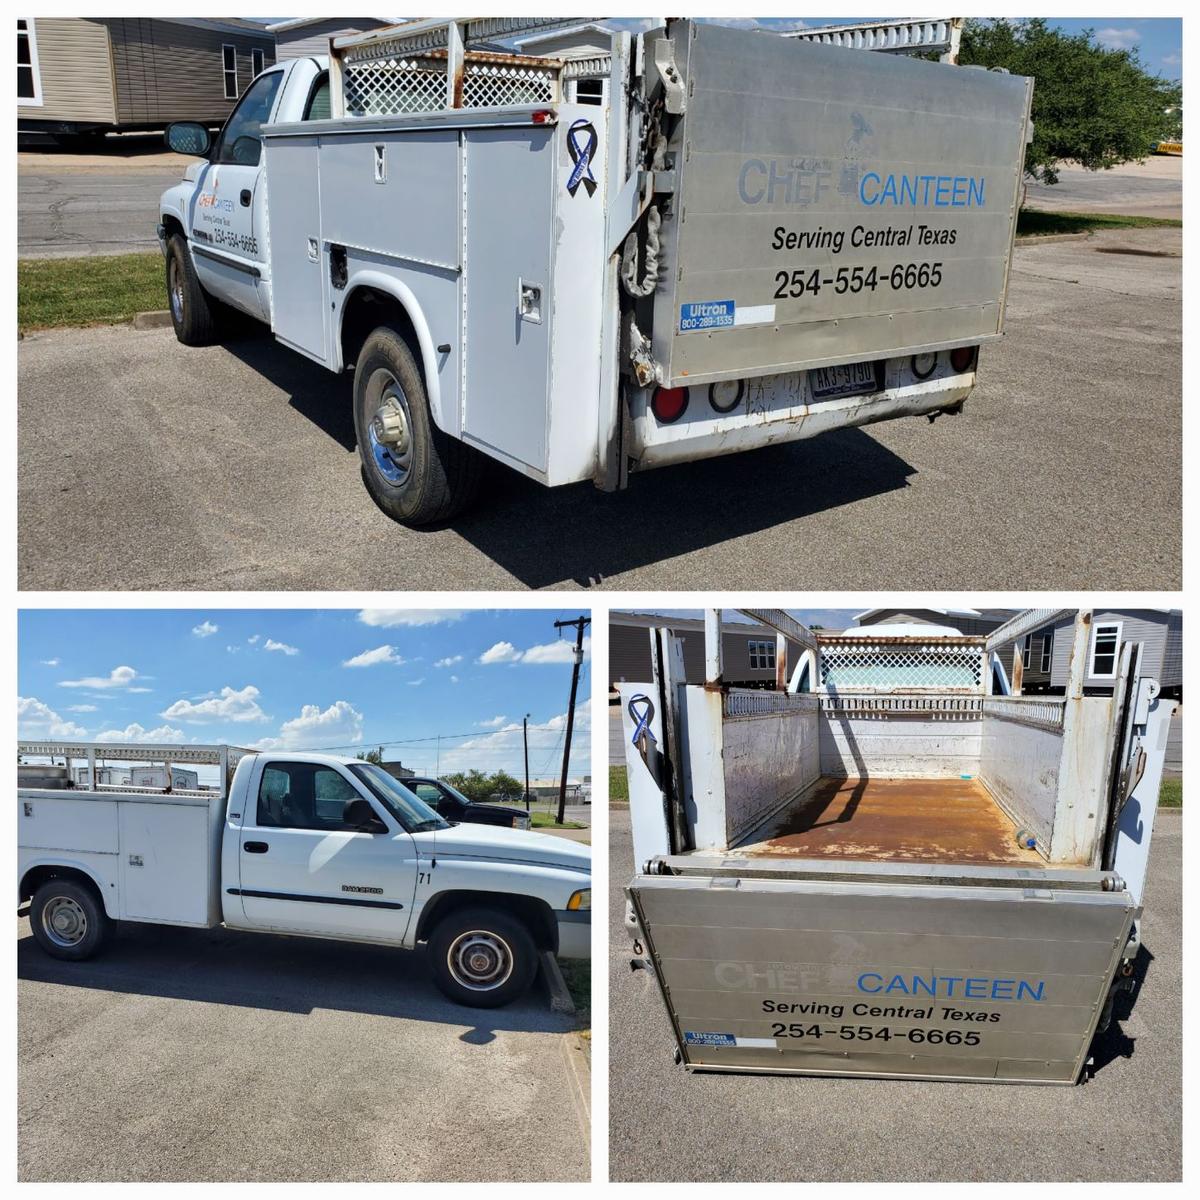 2002 Dodge Ram 2500 Laramie SLT with Utility Bed and Ultron Lift Gate